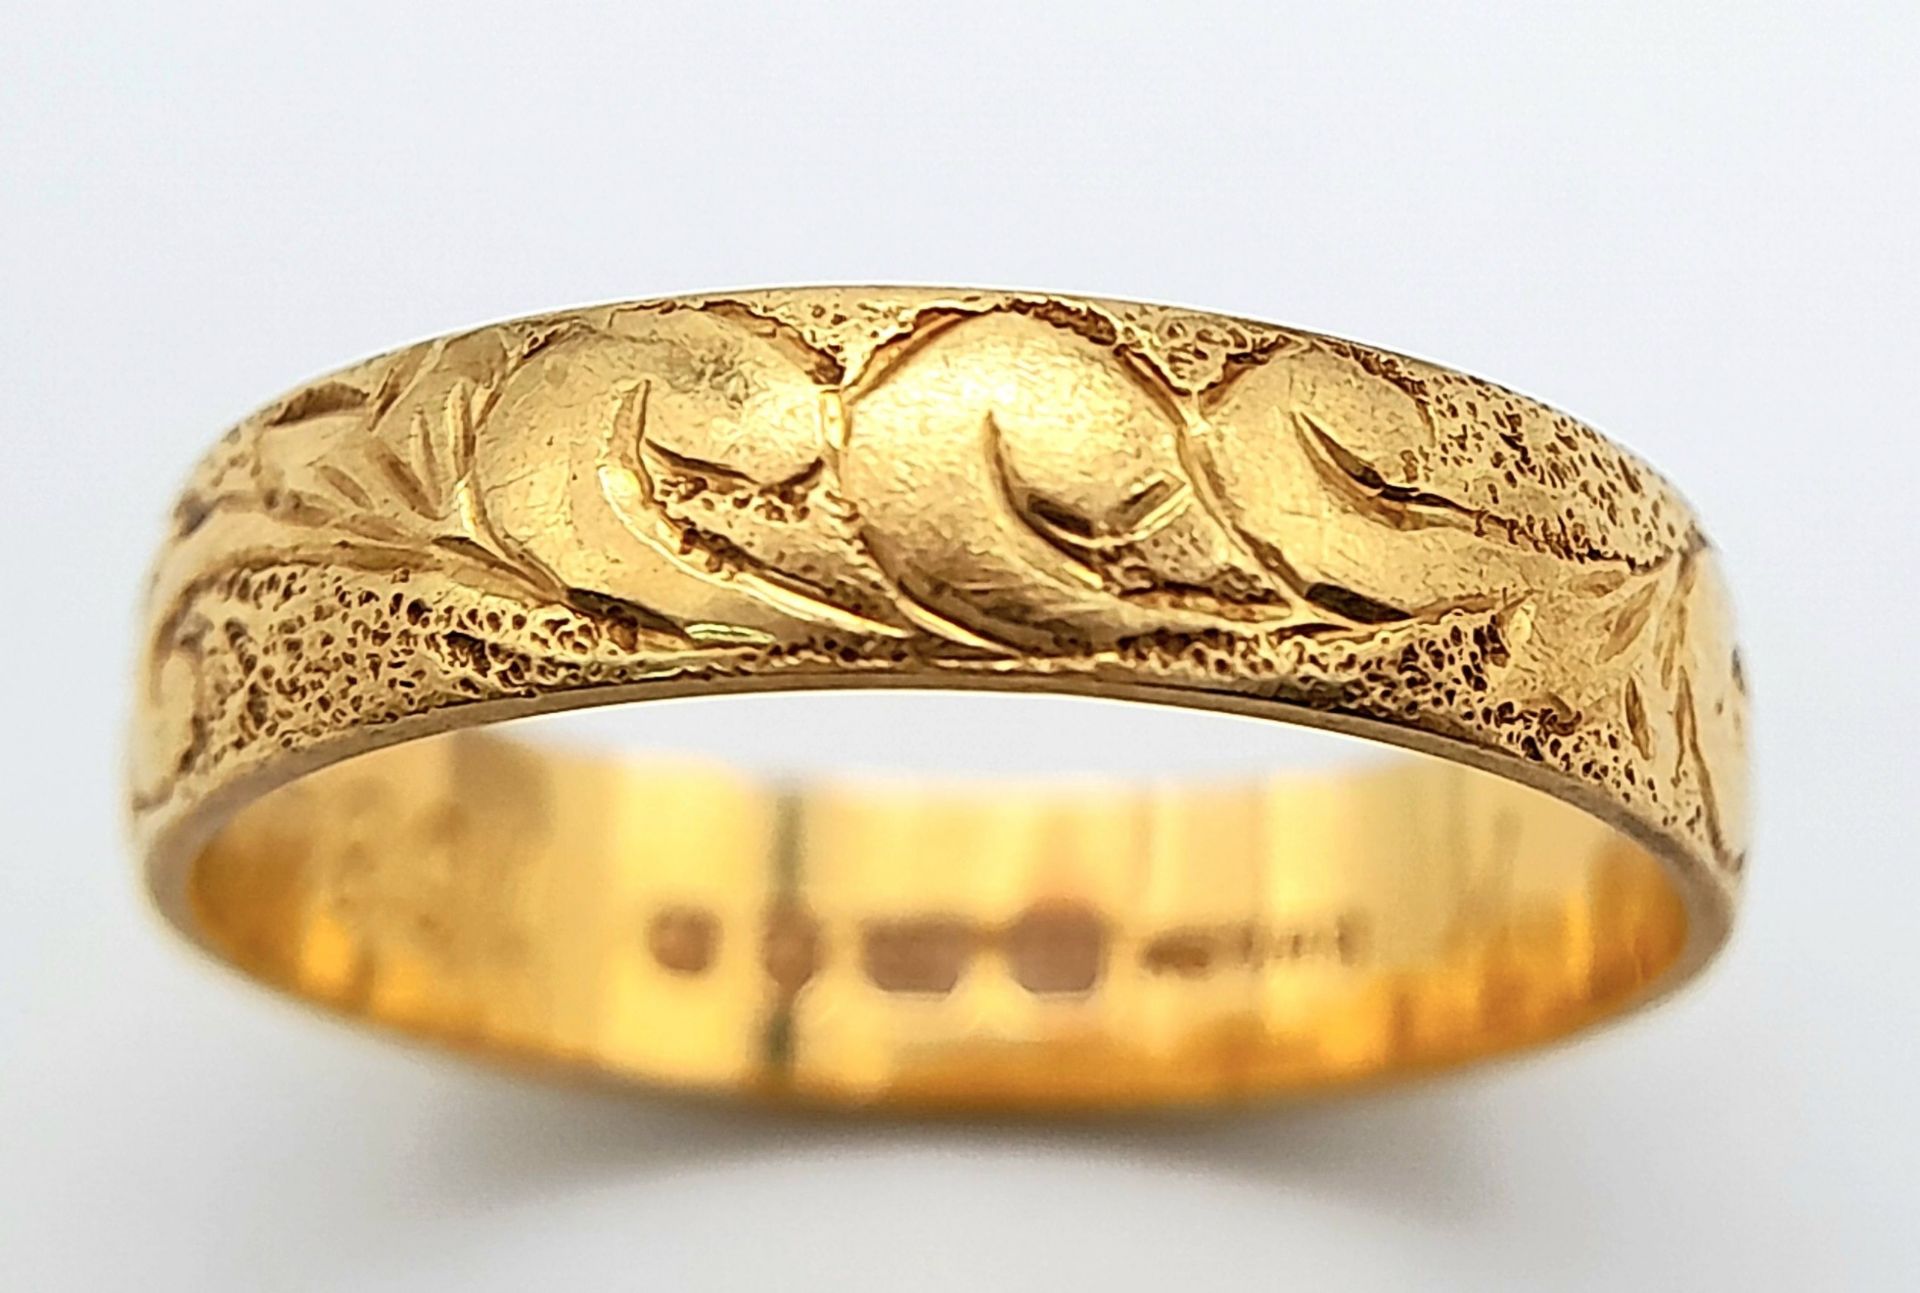 An 18 K yellow gold band ring with an engraved surface. Size: L, weight: 2.5 g. - Bild 5 aus 6